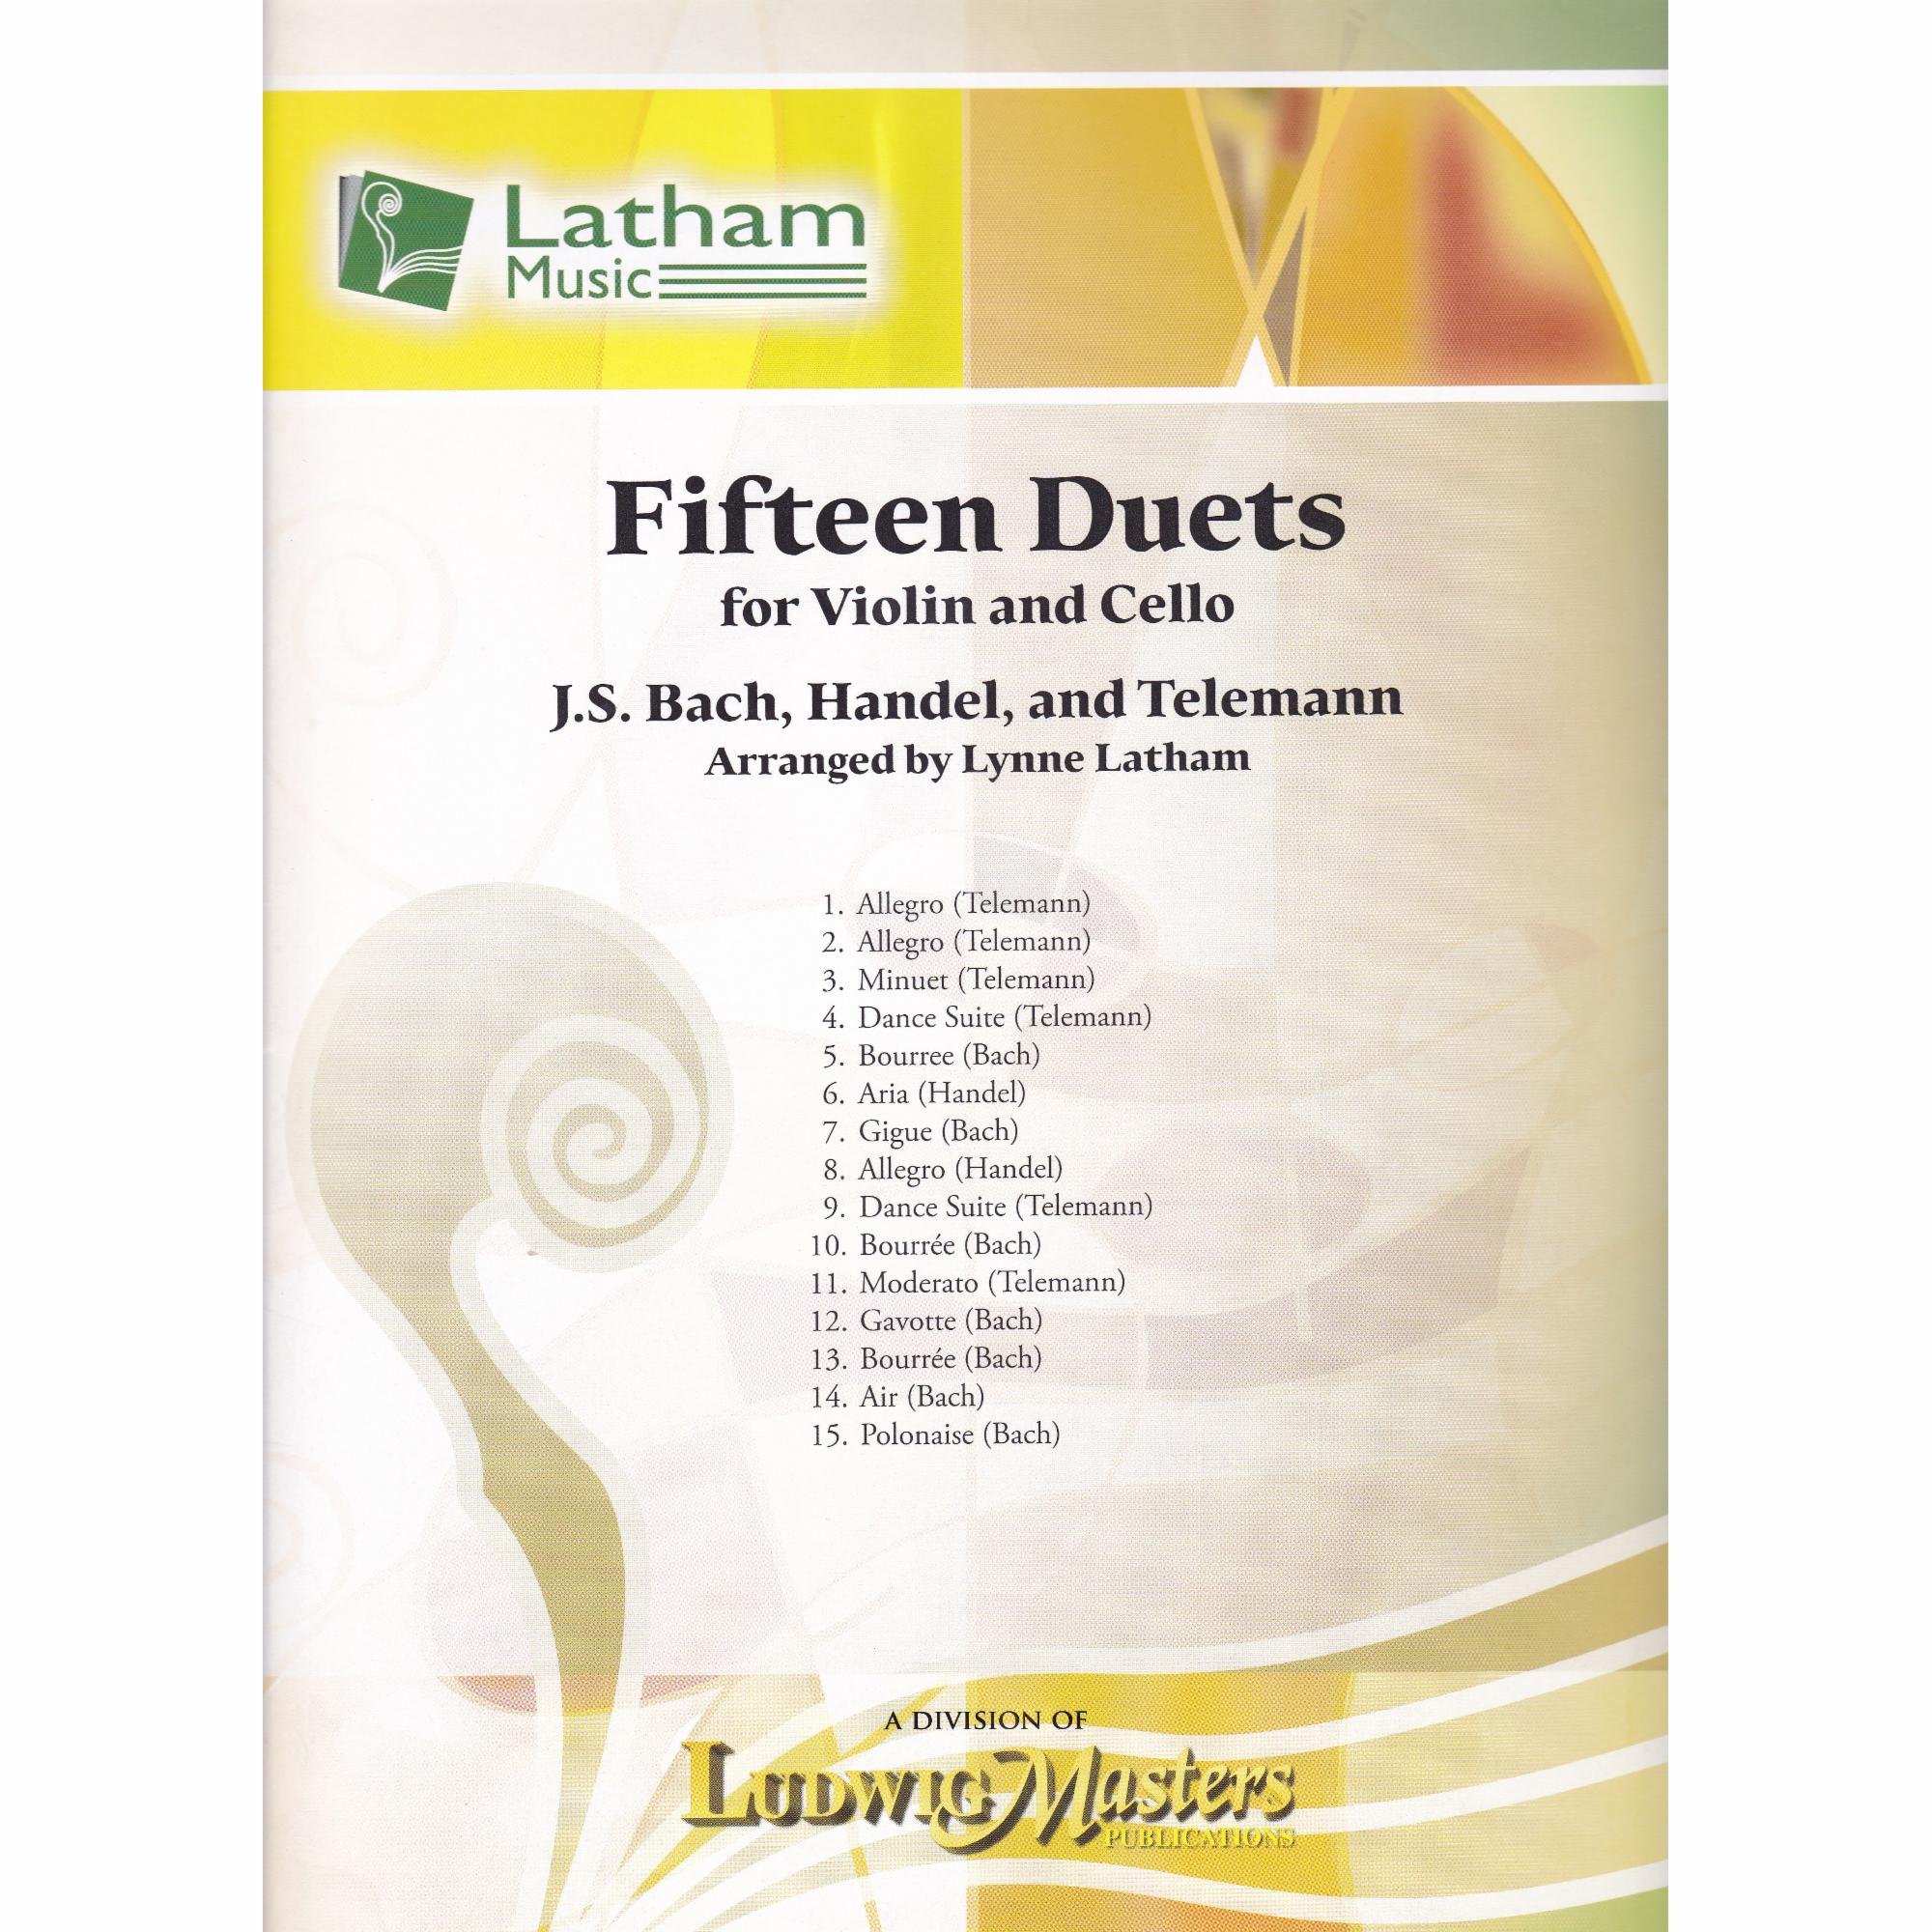 Fifteen Duets for Violin and Cello